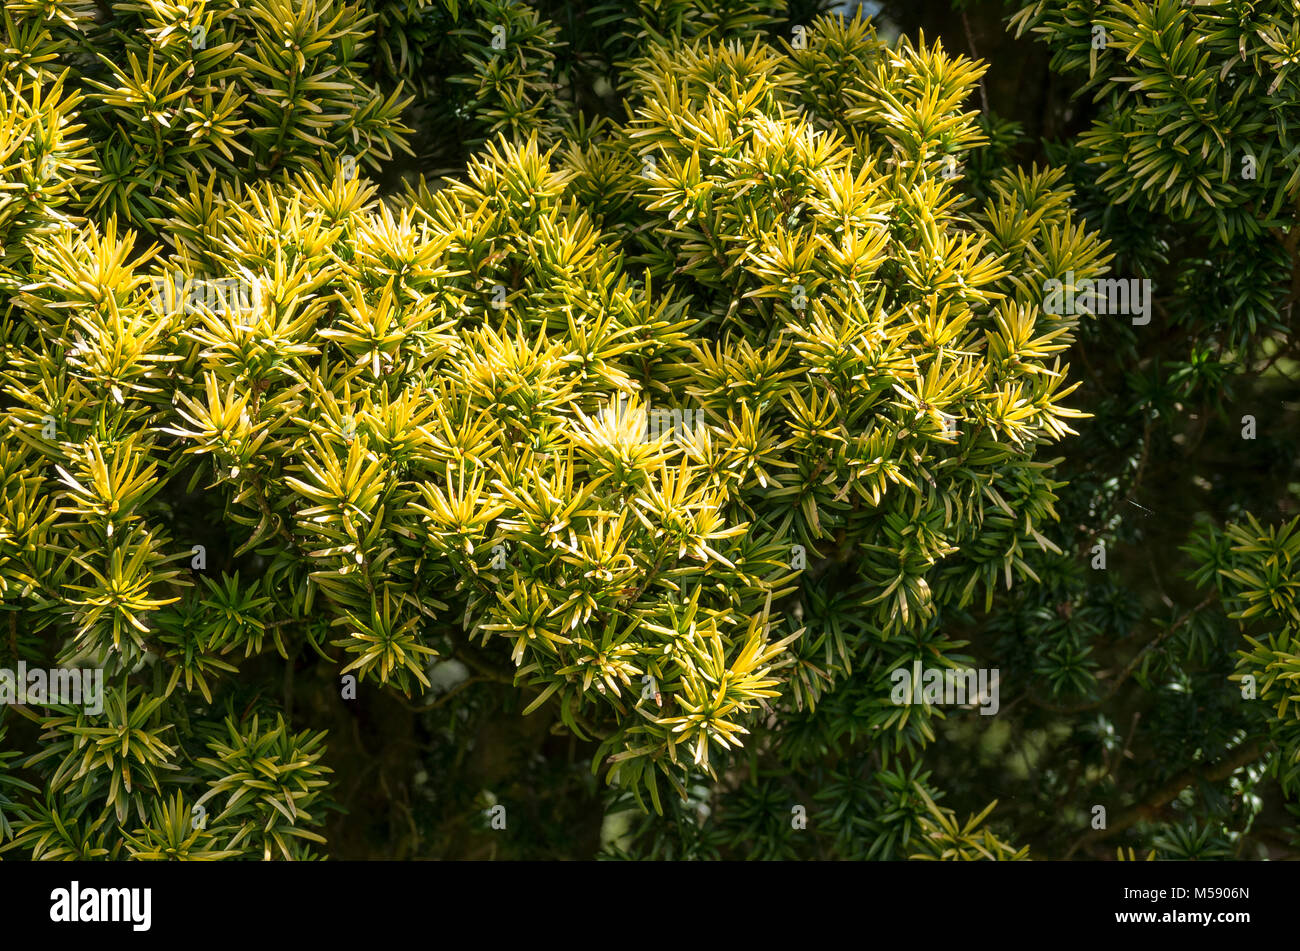 Taxus Baccata Standishii with slender golden leaves has been awarded the RHS AGM Stock Photo